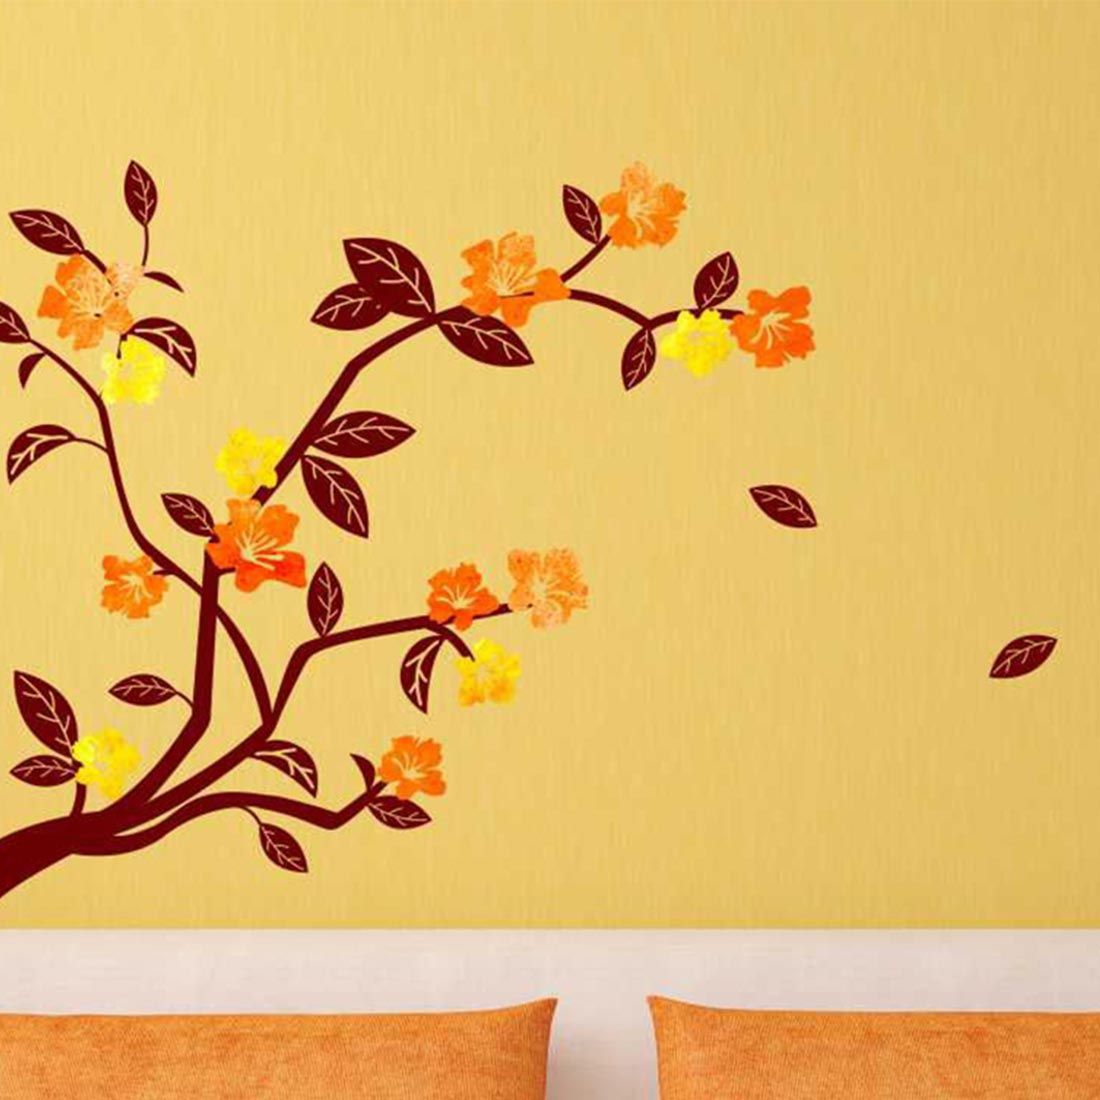 Featured image of post Flower Painting Designs On Walls / Ecraftindia mummy da dhaba wall hanging.